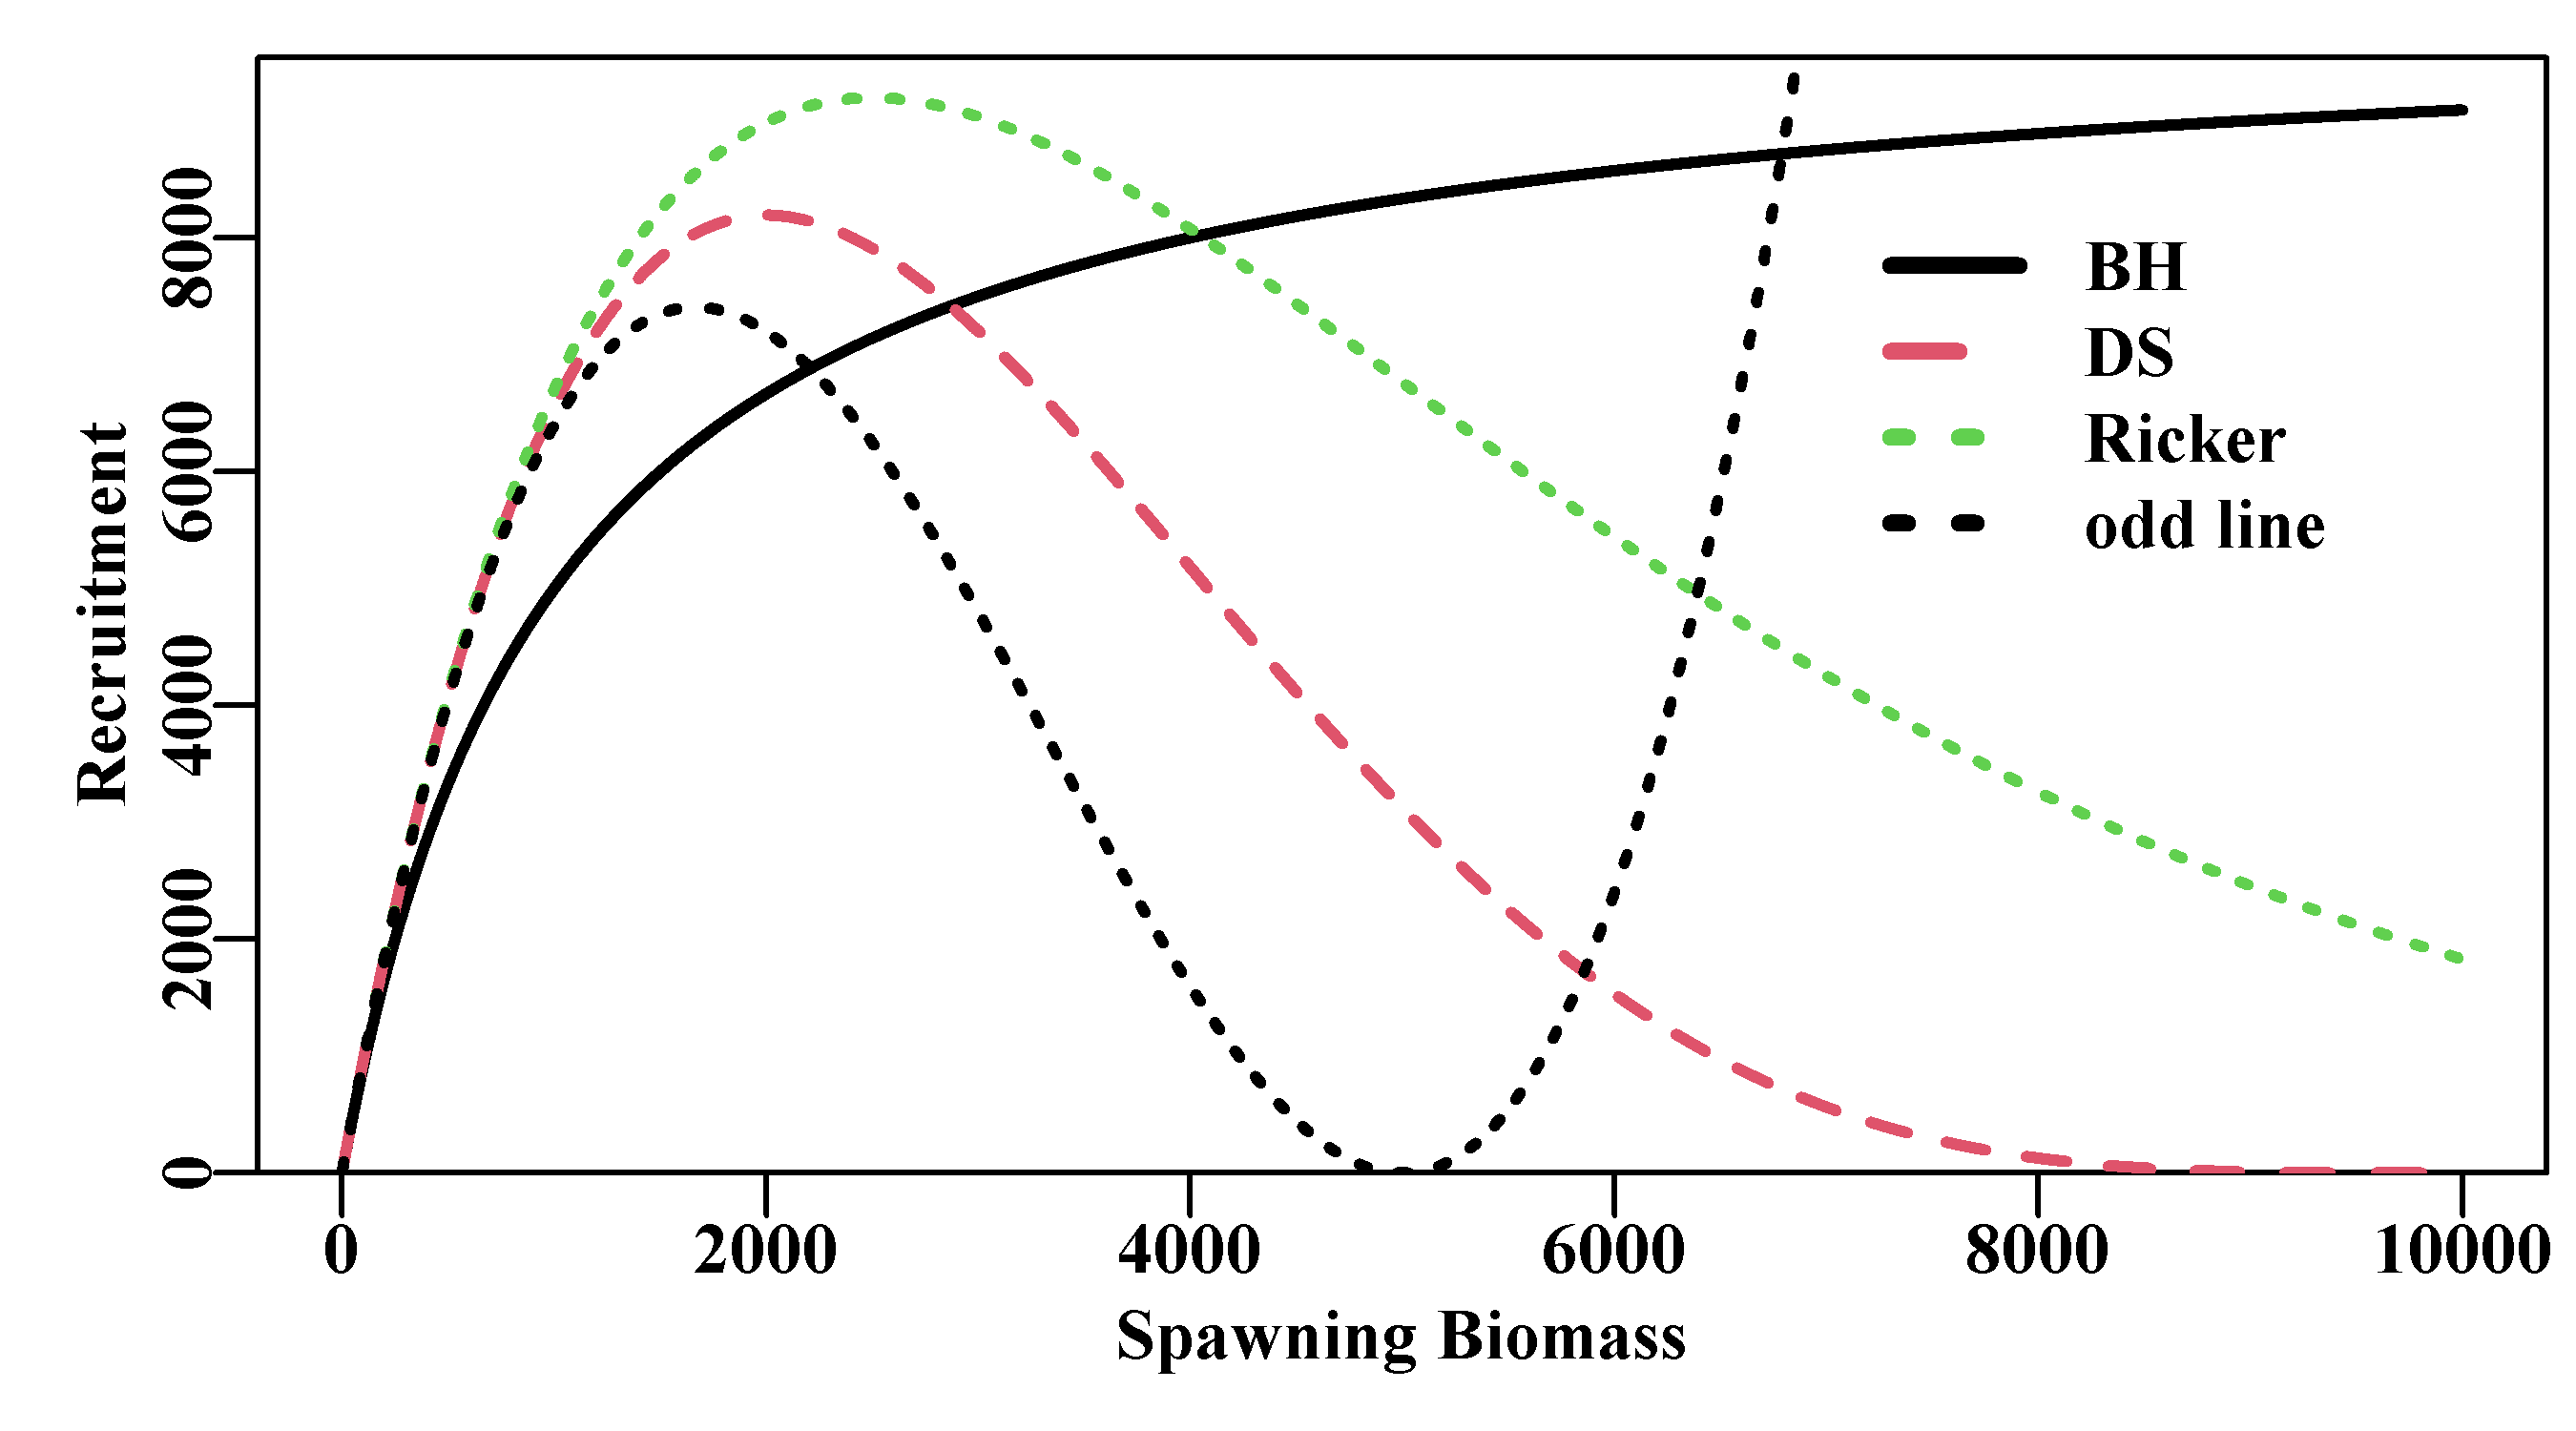 A comparison of the Beverton-Holt (BH), Ricker, and Deriso-Schnute (DS) stock recruitment curves, as implemented within the Deriso-Schnute generalized equation Equ(5.19). For the DS curve, a \(\gamma = 0.5\) leads to unrealistic outcomes (odd line).